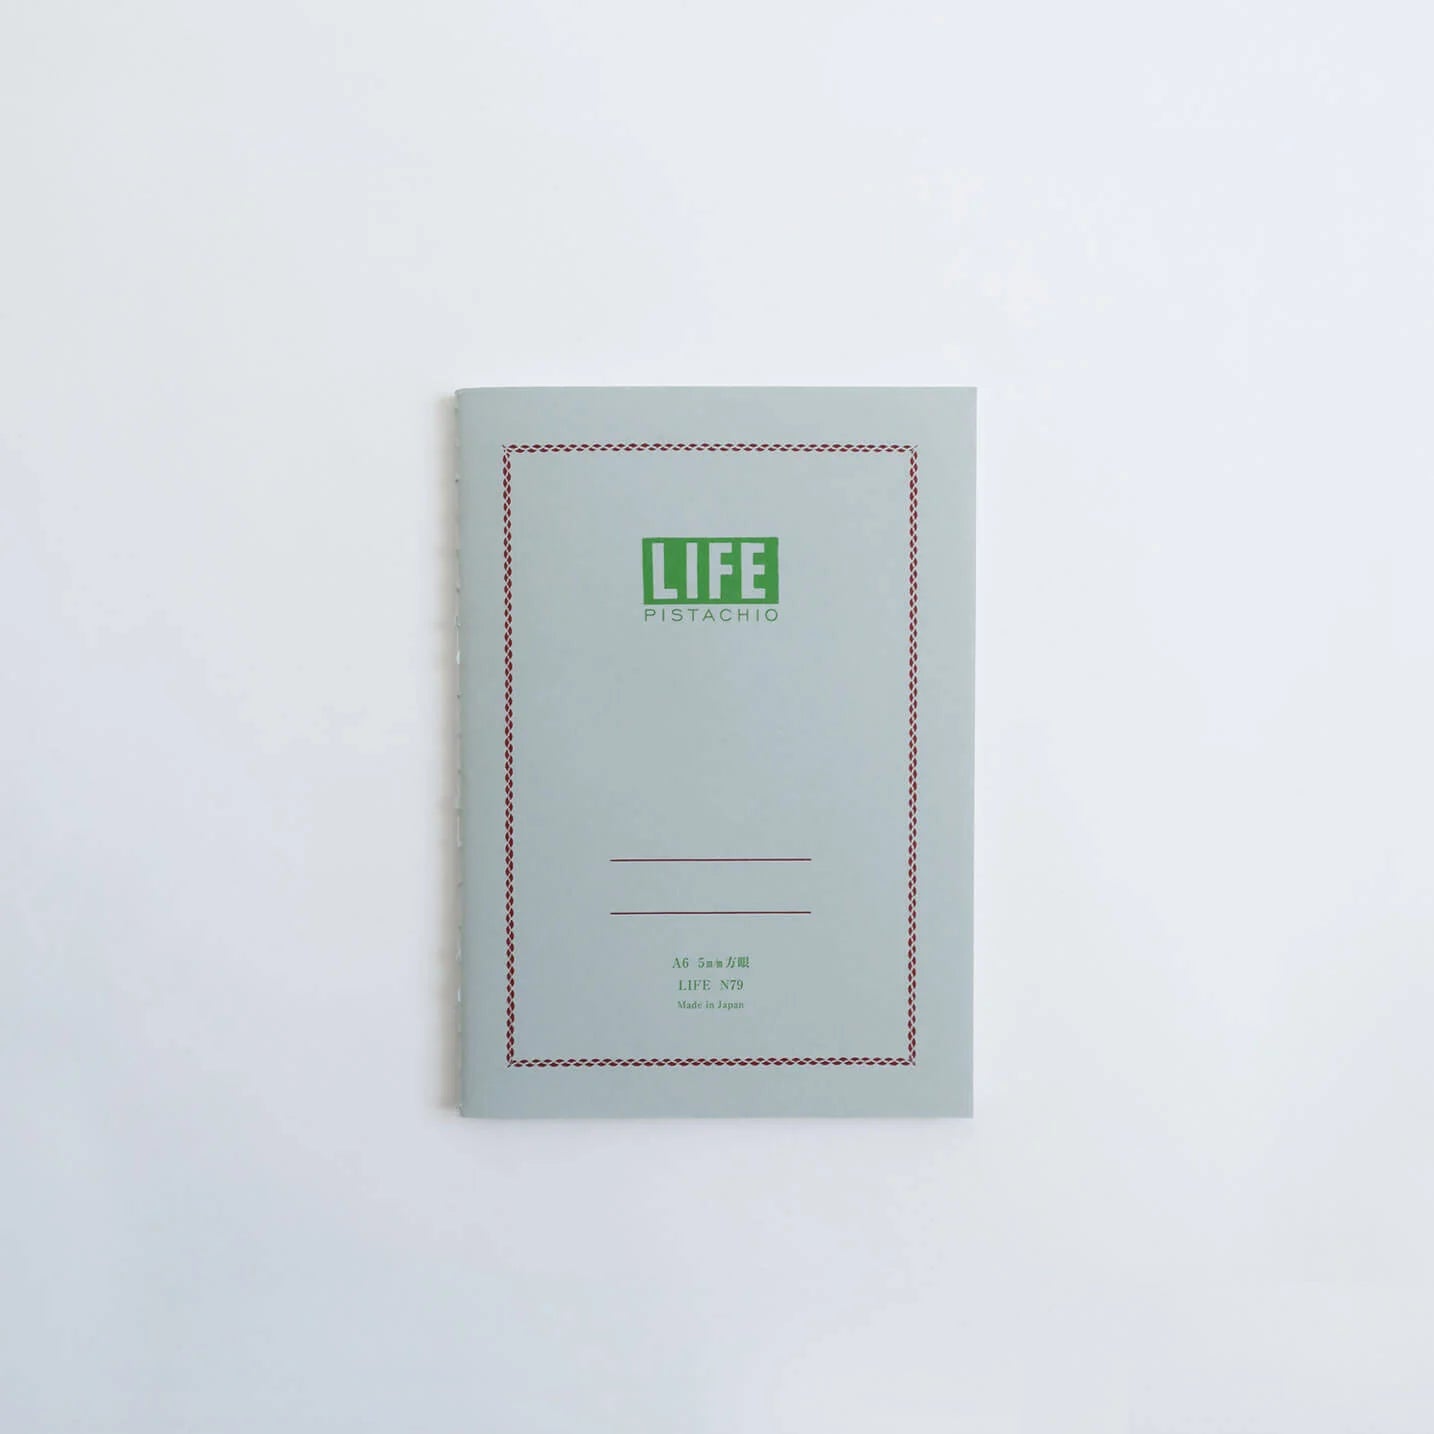 Life Pistachio Notebook - A6 Ruled